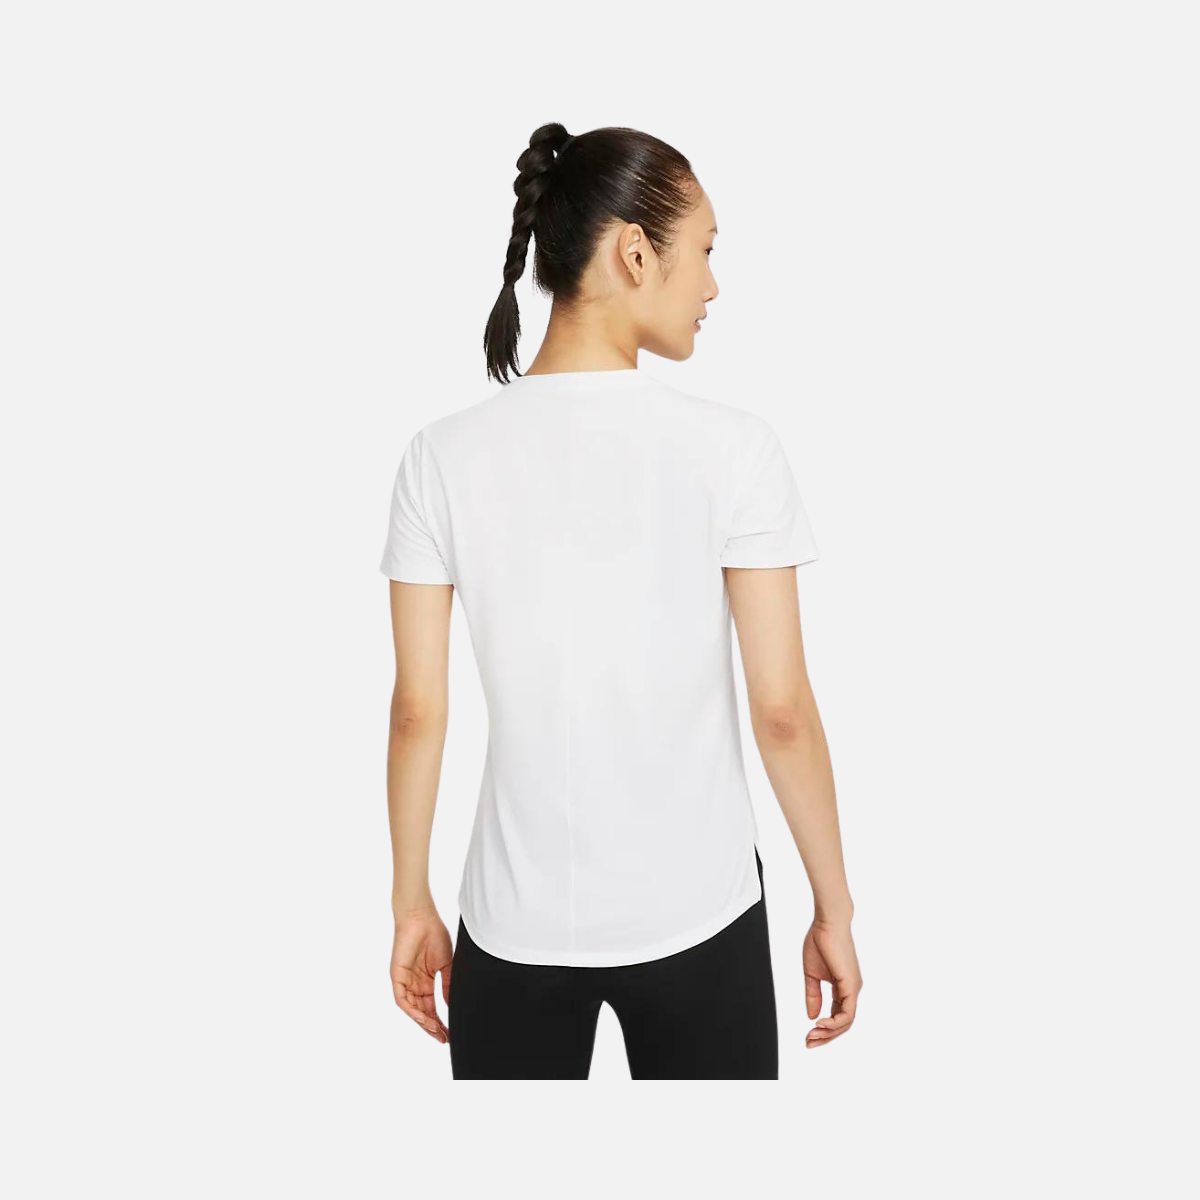 Nike Dri-Fit One Luxe Women's Standard Fit Short Sleeve Top -White